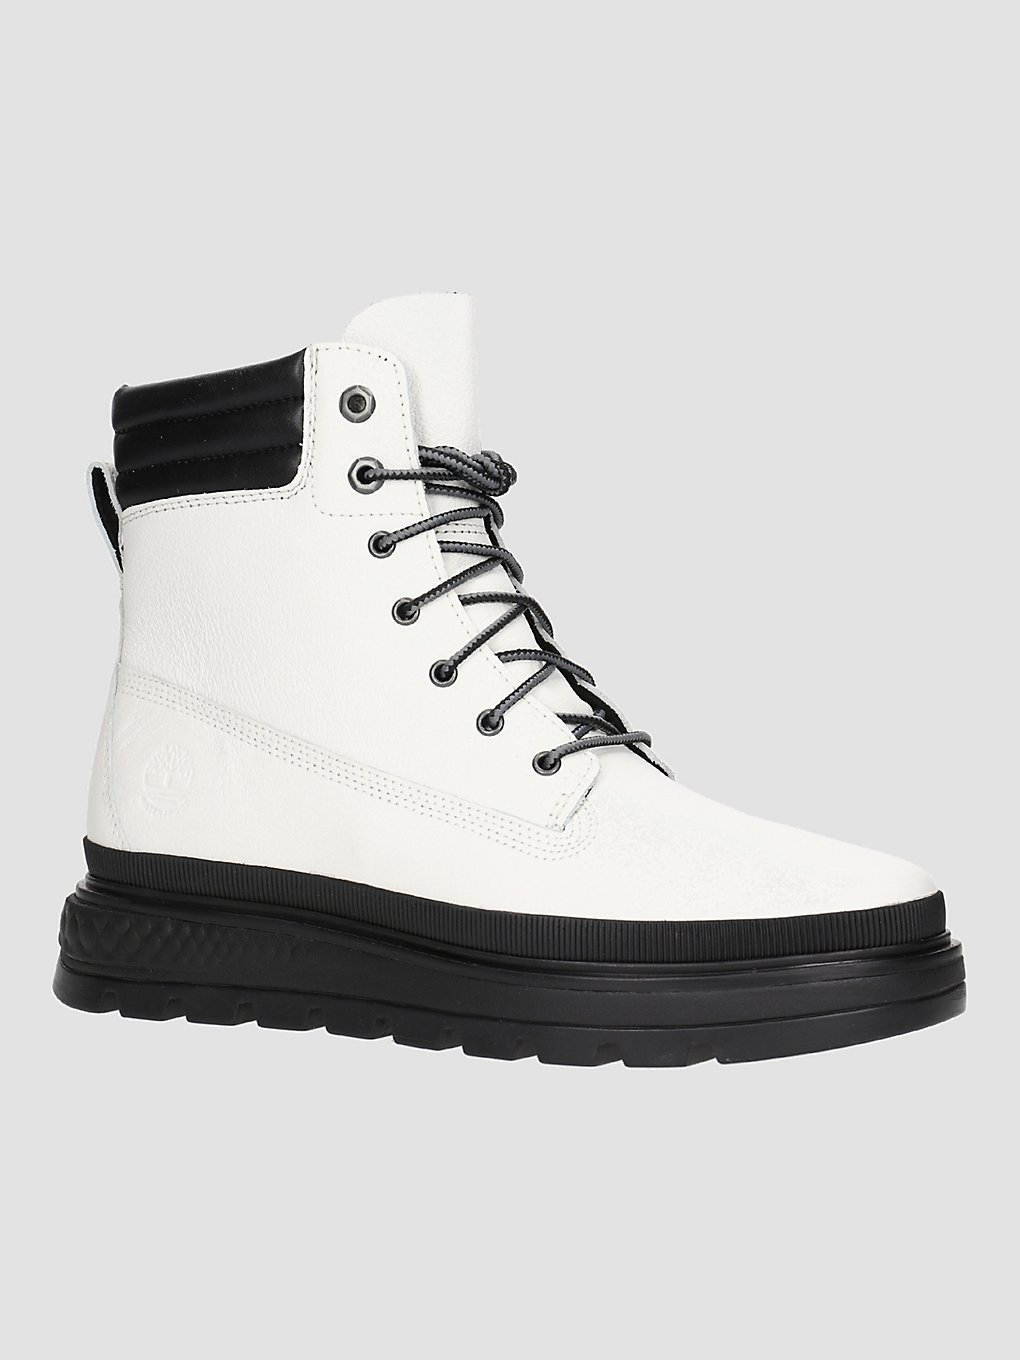 Timberland Ray City 6 in Boot WP Boots white